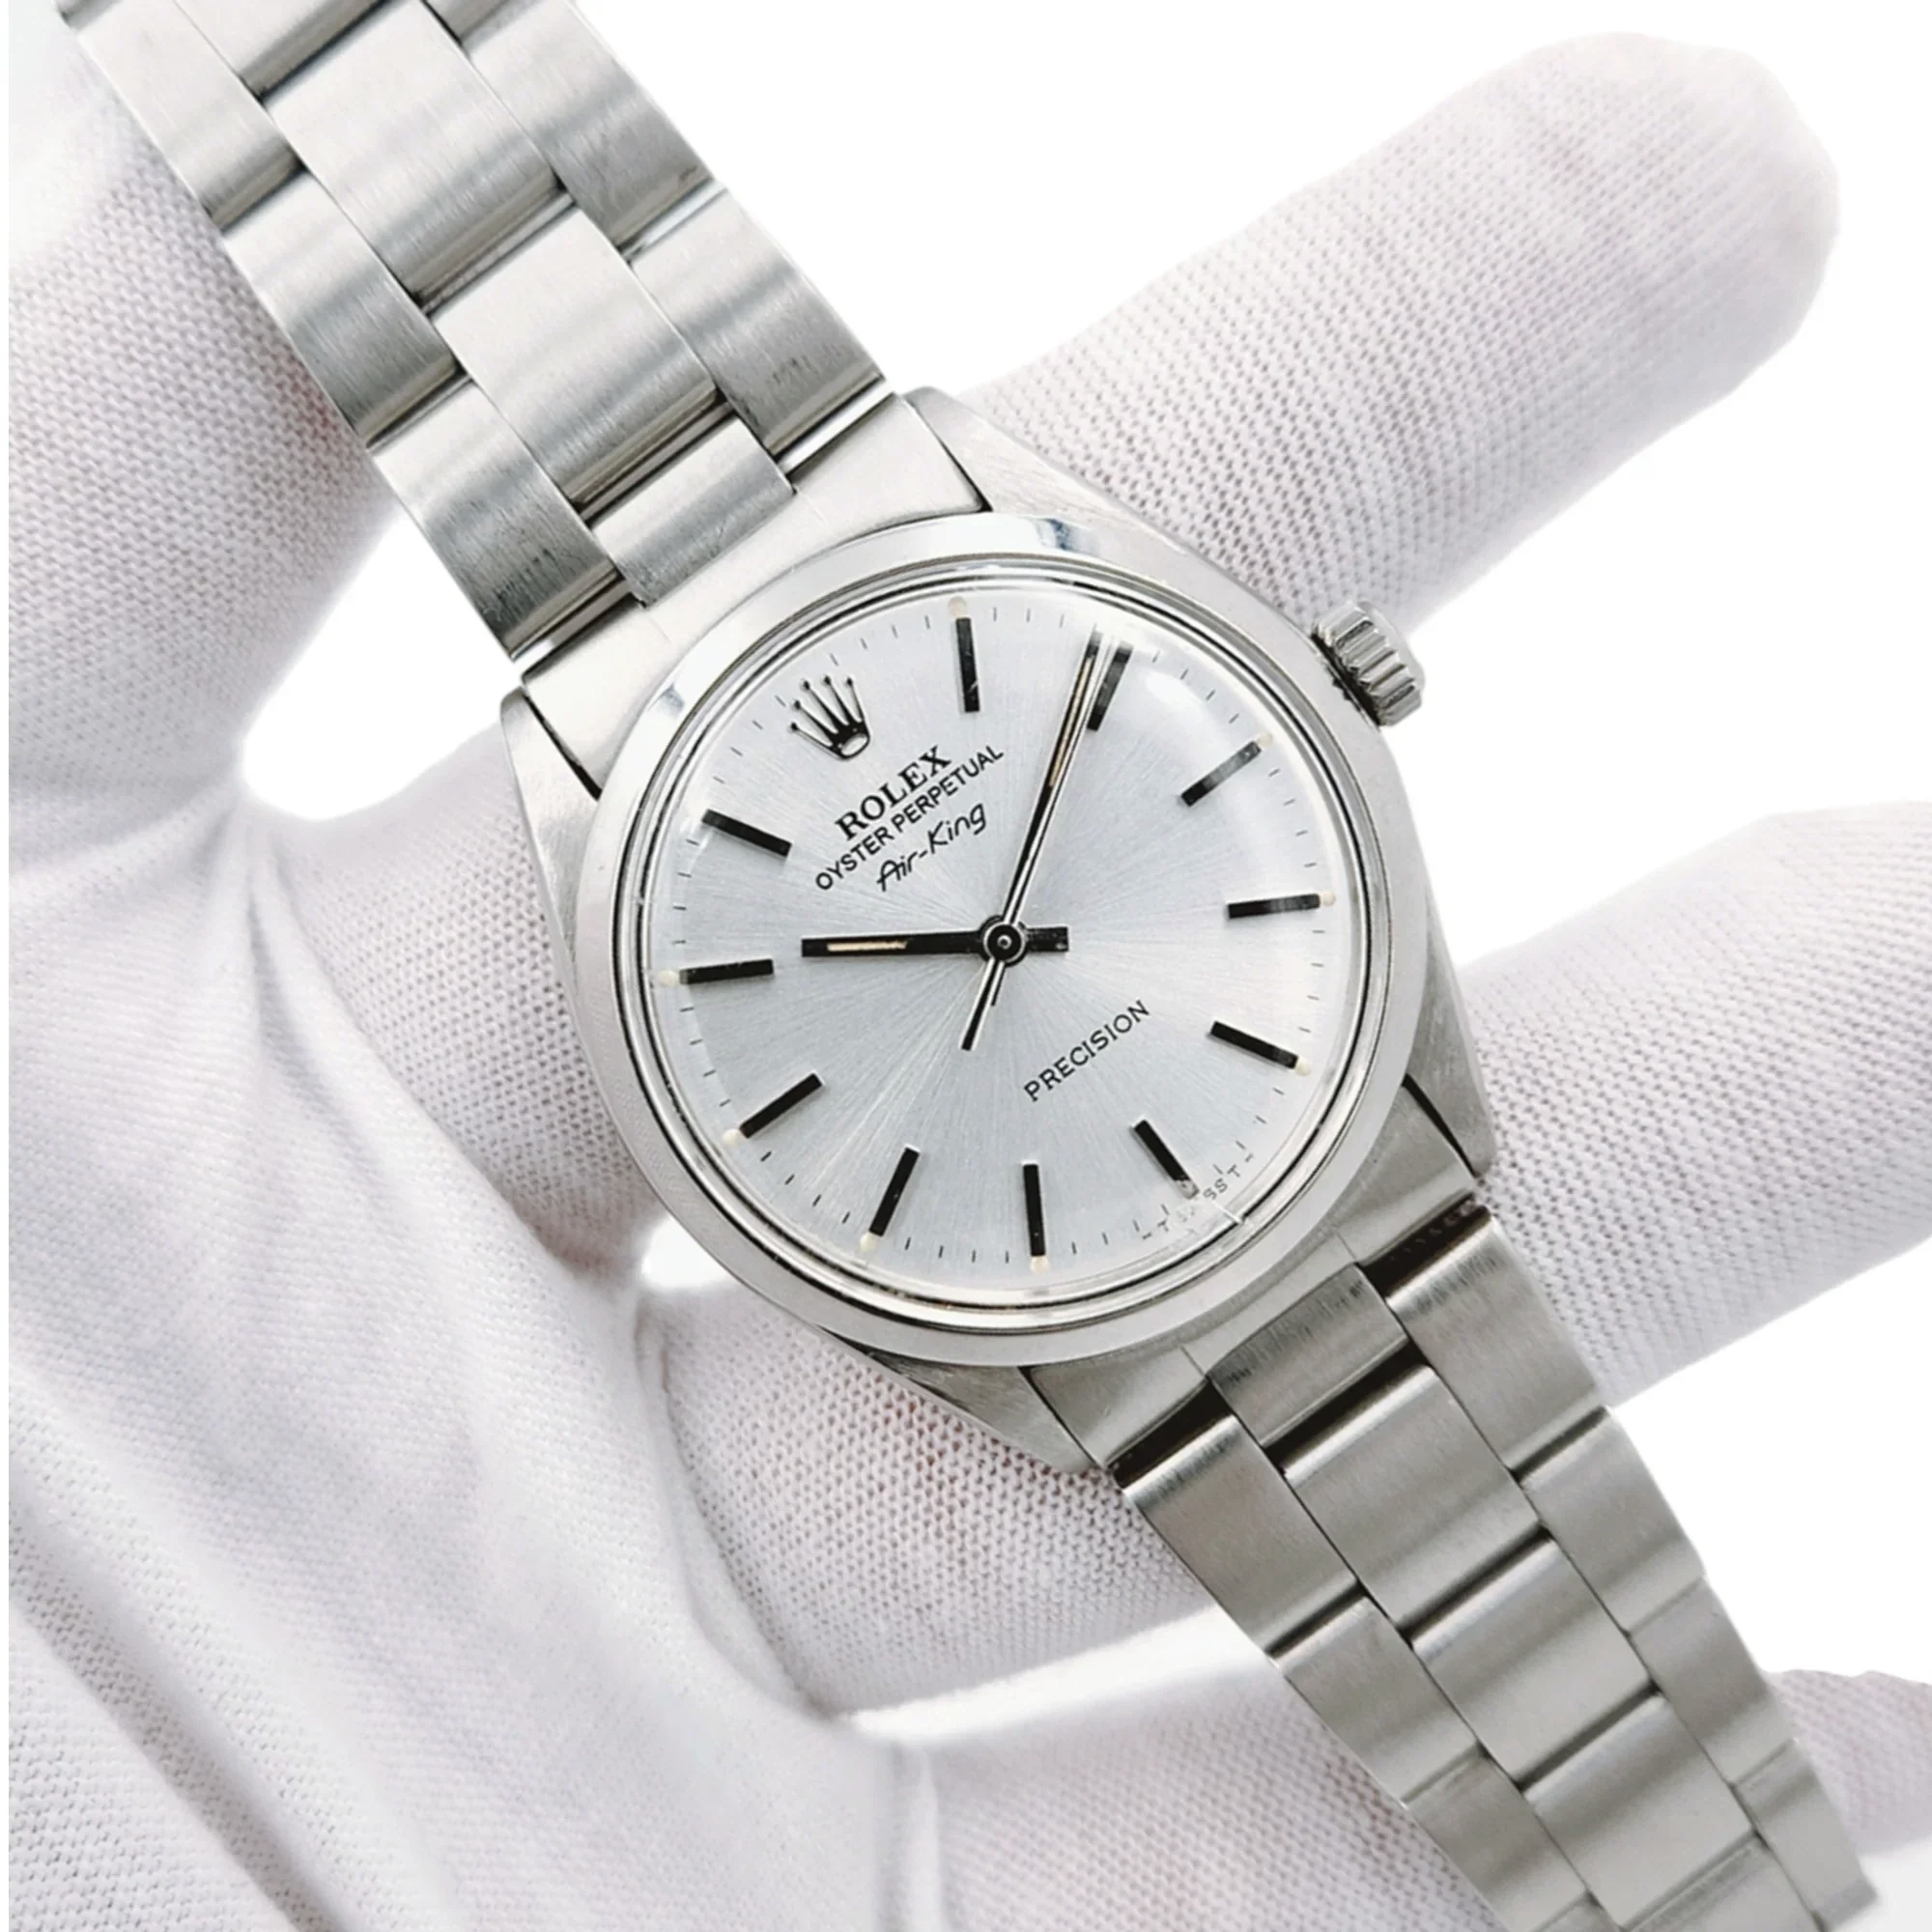 1970 Men's Rolex 34mm Air-King Vintage Oyster Stainless Steel Wristwatch w/ Silver Dial & Smooth Bezel. (Pre-Owned 5500)